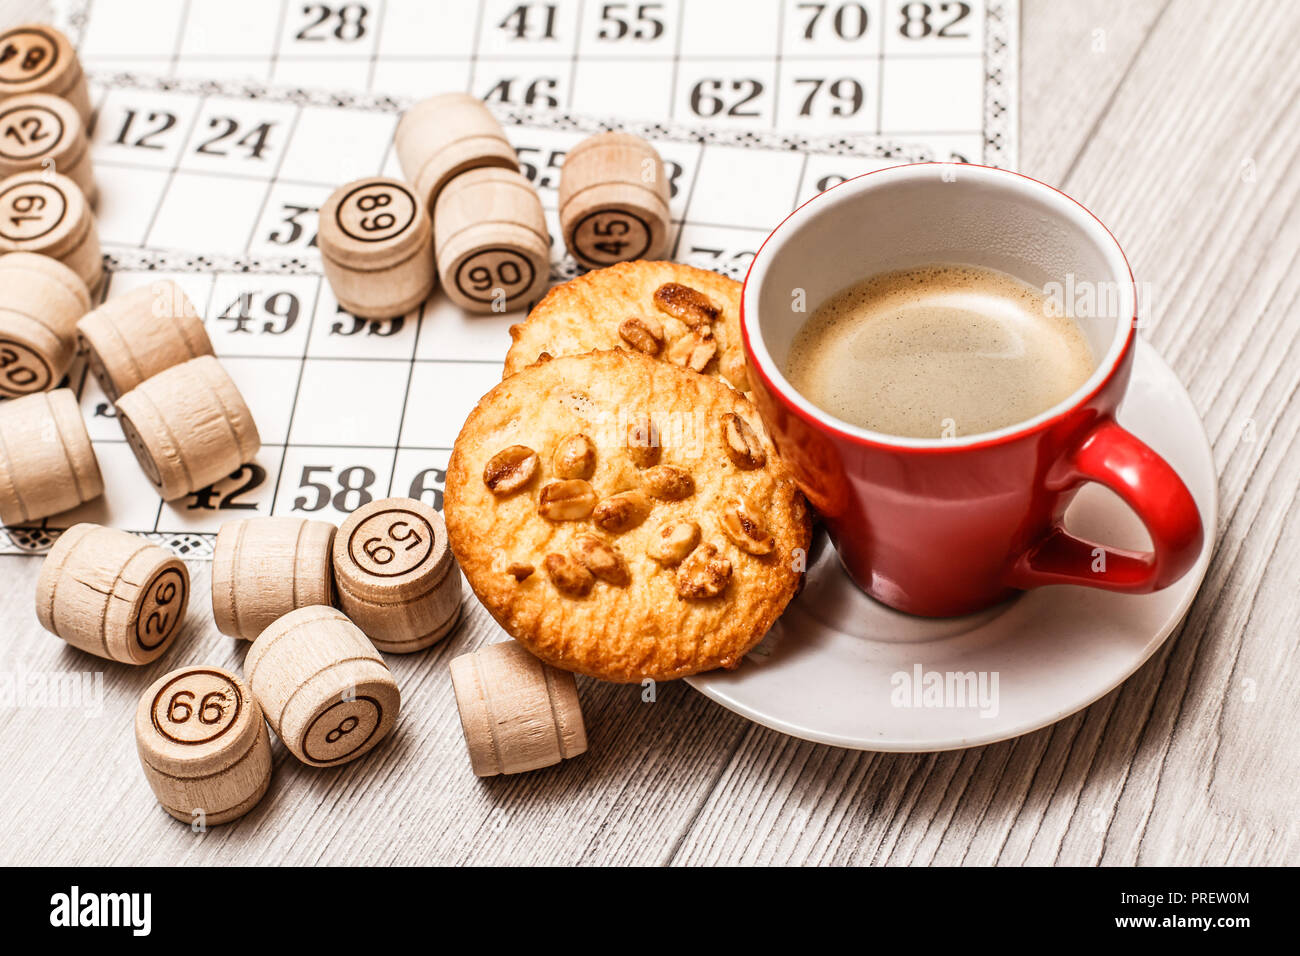 Board game lotto on white desk. Wooden lotto barrels and game cards for a game in lotto with cup of coffee and cookies on plate Stock Photo